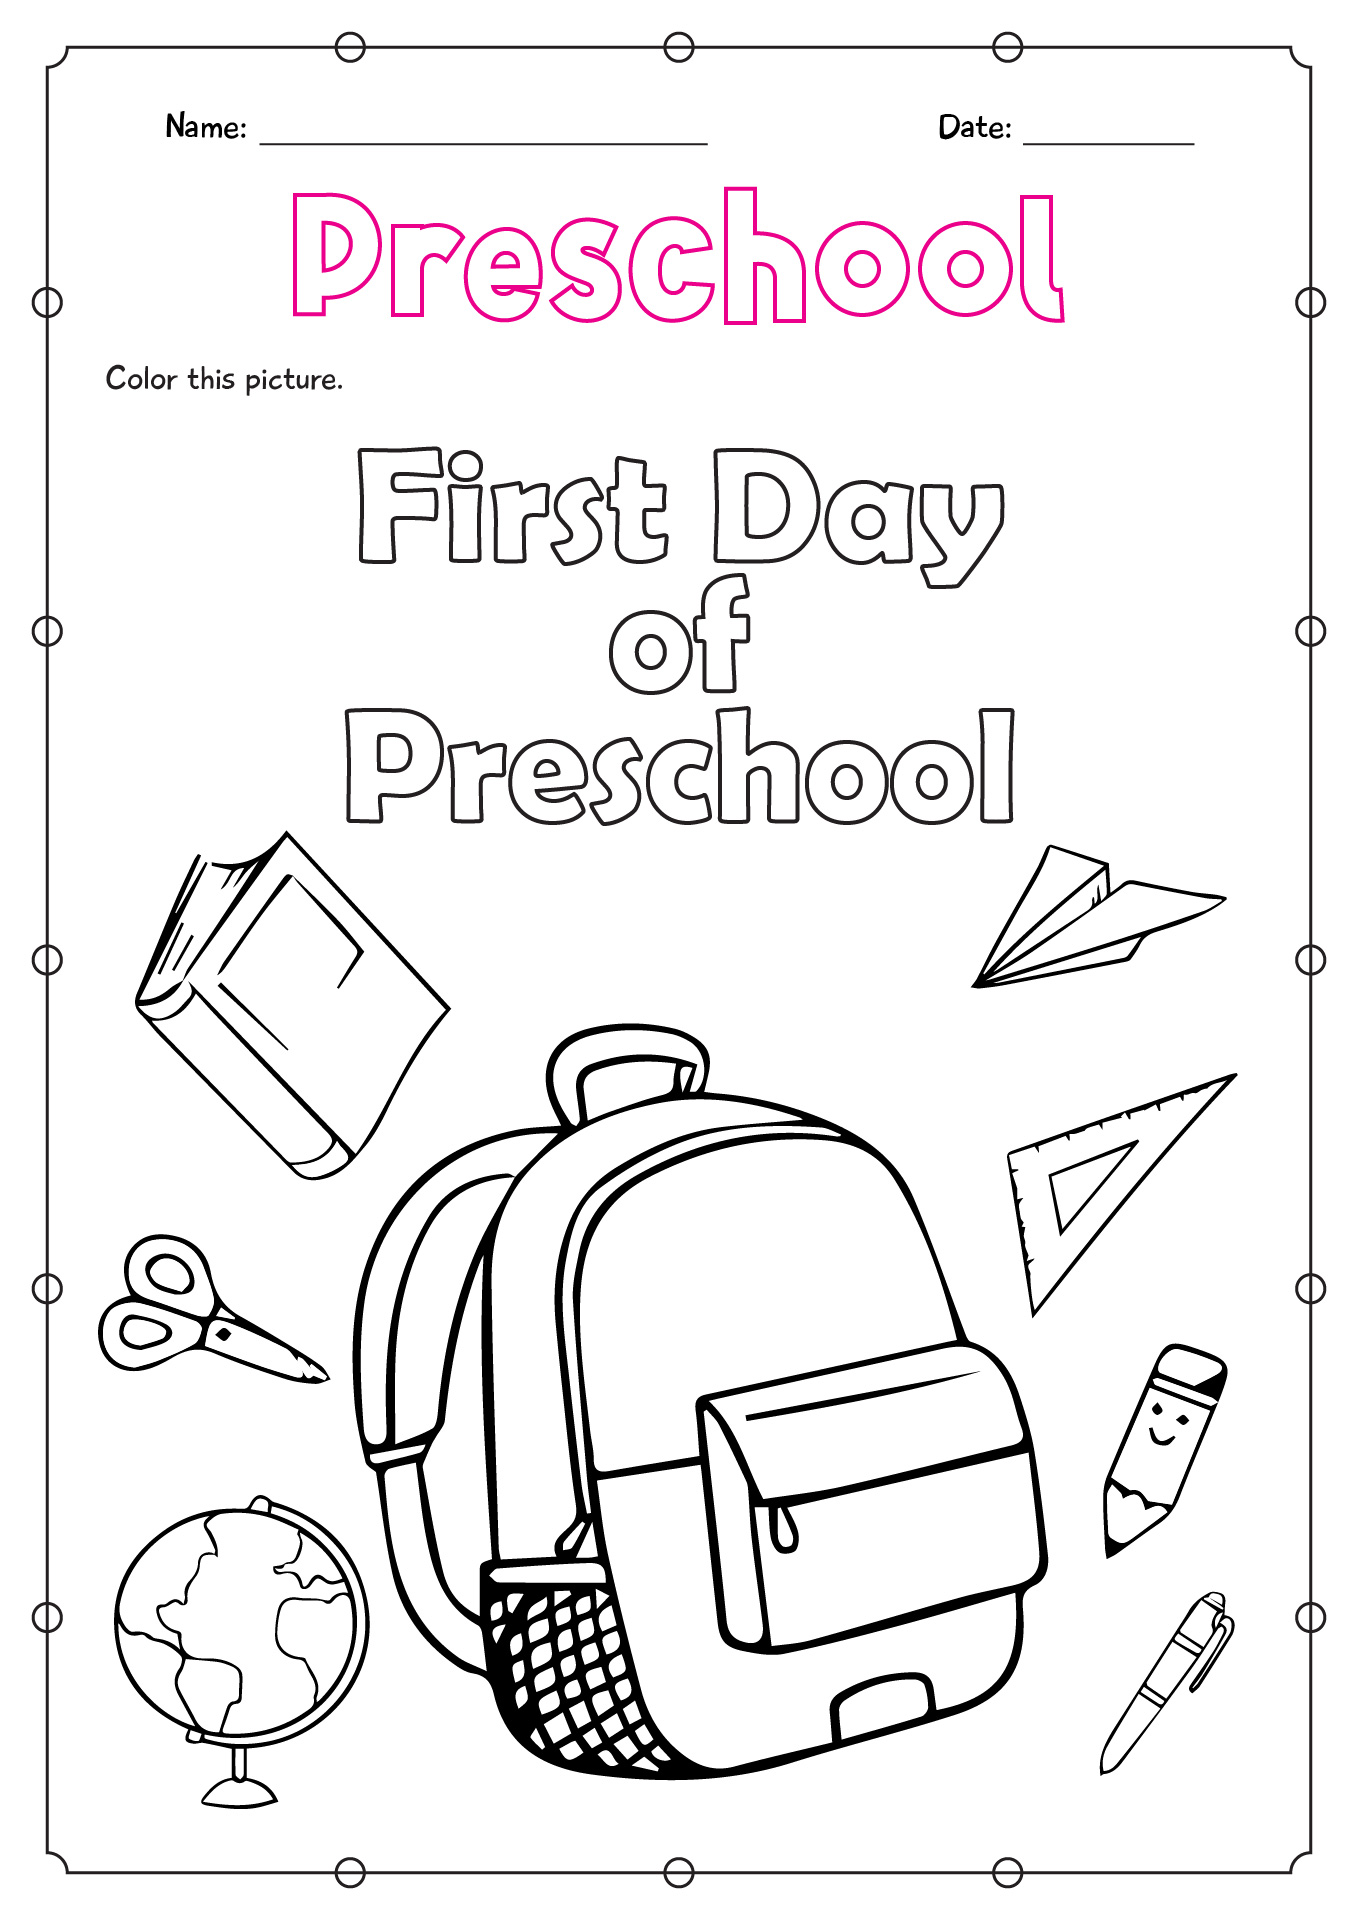 First Day of Preschool Coloring Sheets